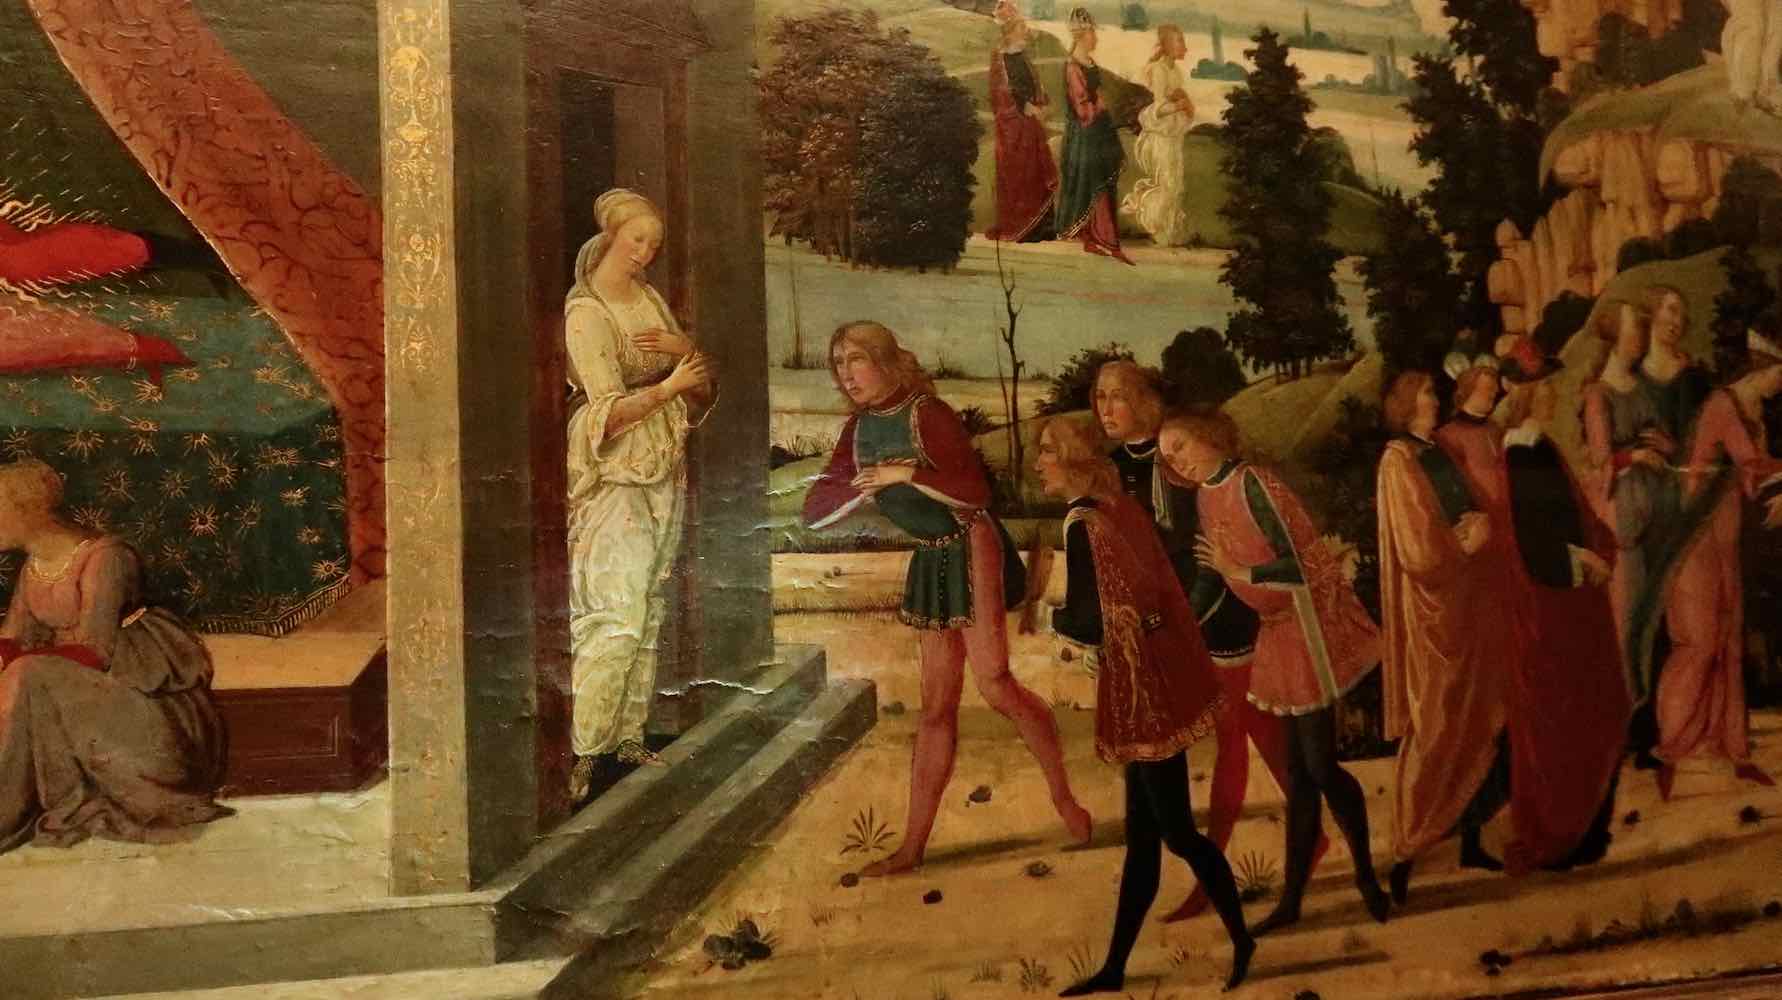 Young Psyche with her courtiers when Cupid first sets eyes on her - a close up of Del Sellaio's Cupid and Psyche painted in 1473 in the Fitzwilliam Museum, Cambridge